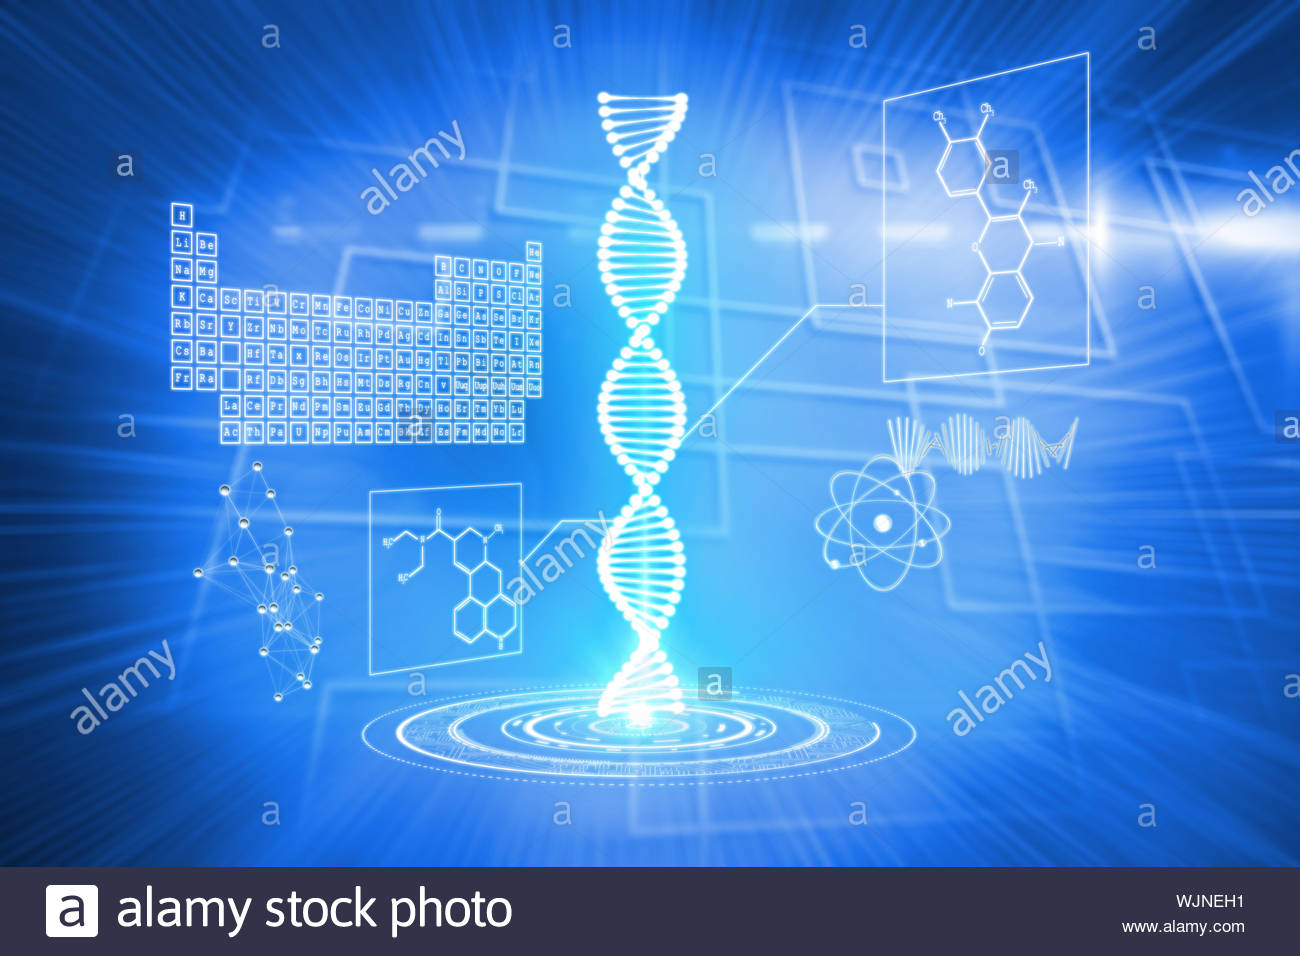 DNA helix interface against background with glowing squares Stock